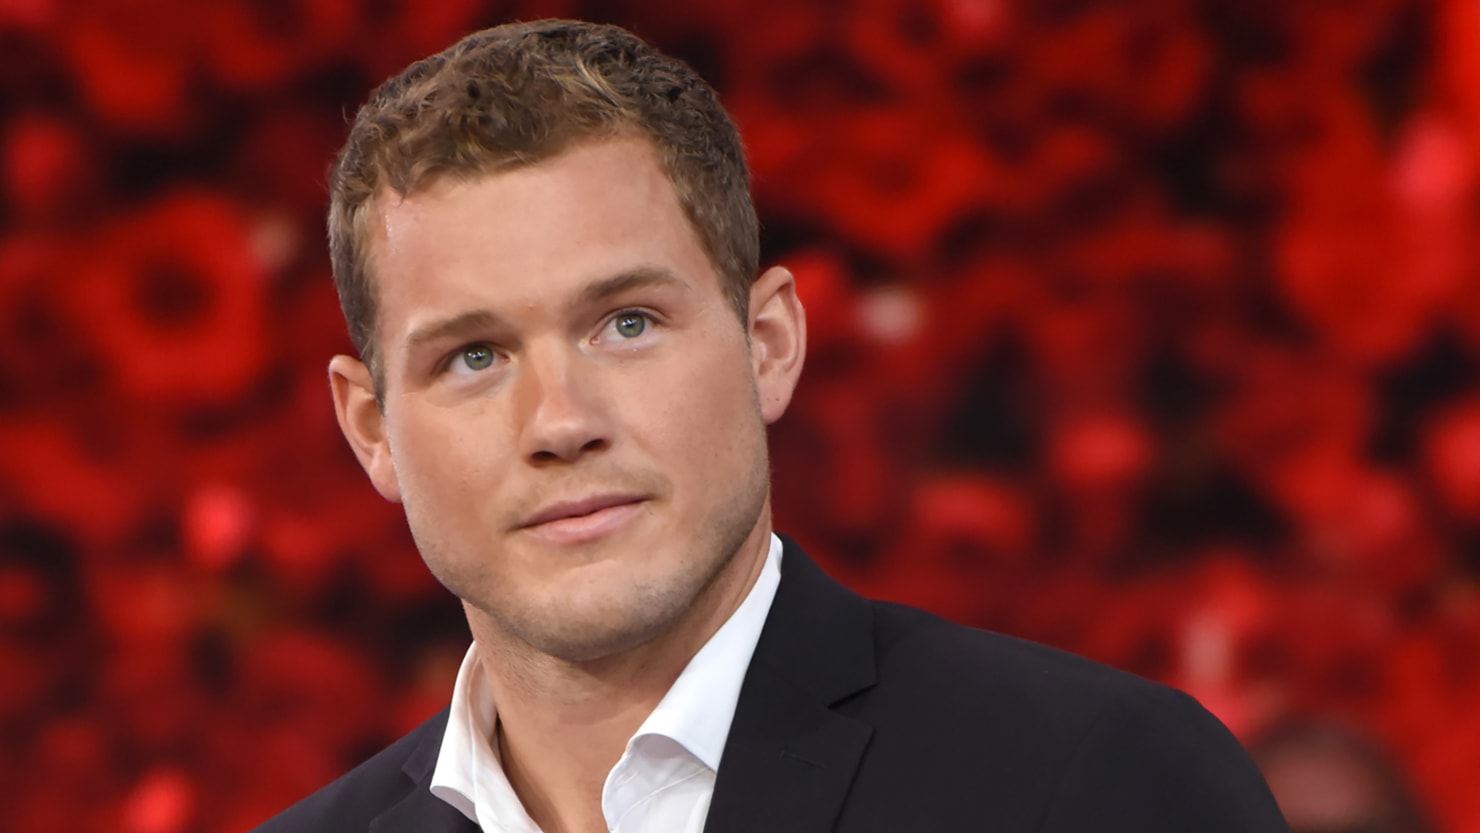 ‘Bachelor’ Colton Underwood, who turns out to be gay, does not change how he allegedly chased his ex-girlfriend